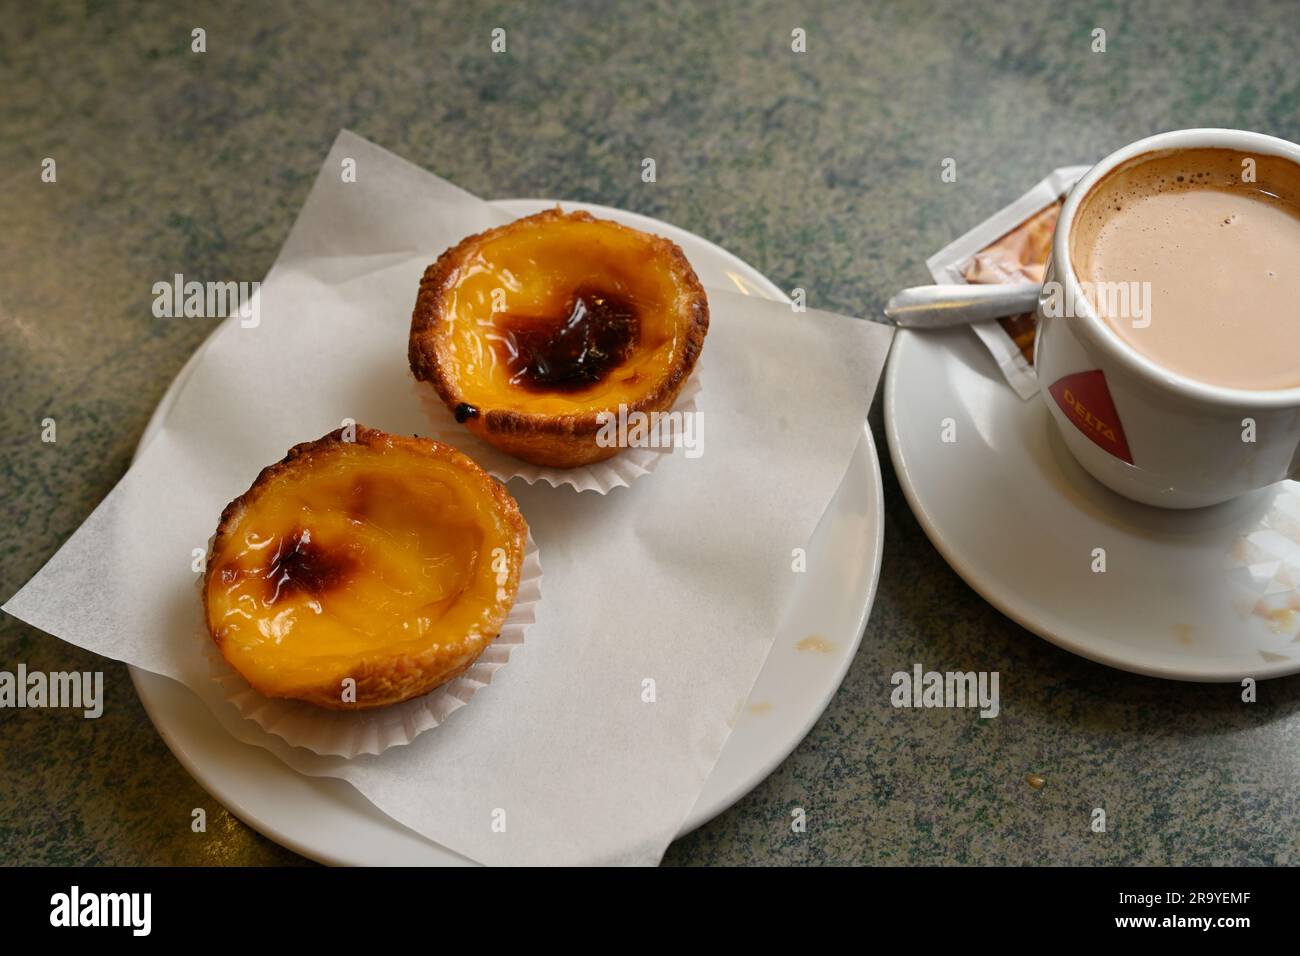 Two traditional Portuguese egg tart pastry, Pastel de Nata, with cup of coffee Stock Photo